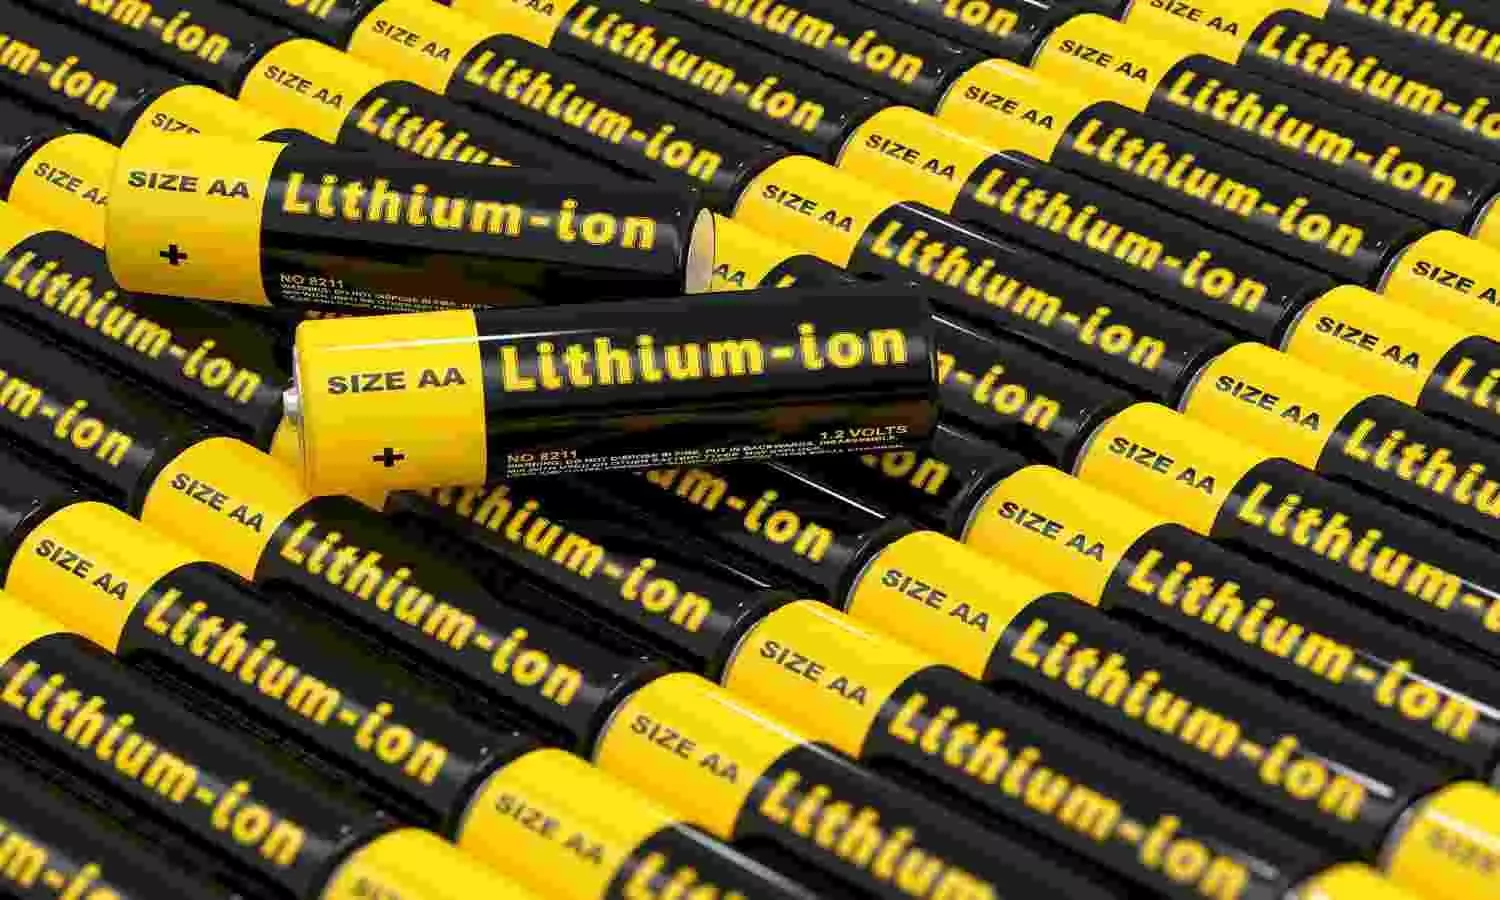 IATA has long supported countries to strengthen enforcement of lithium battery transport safety regulations